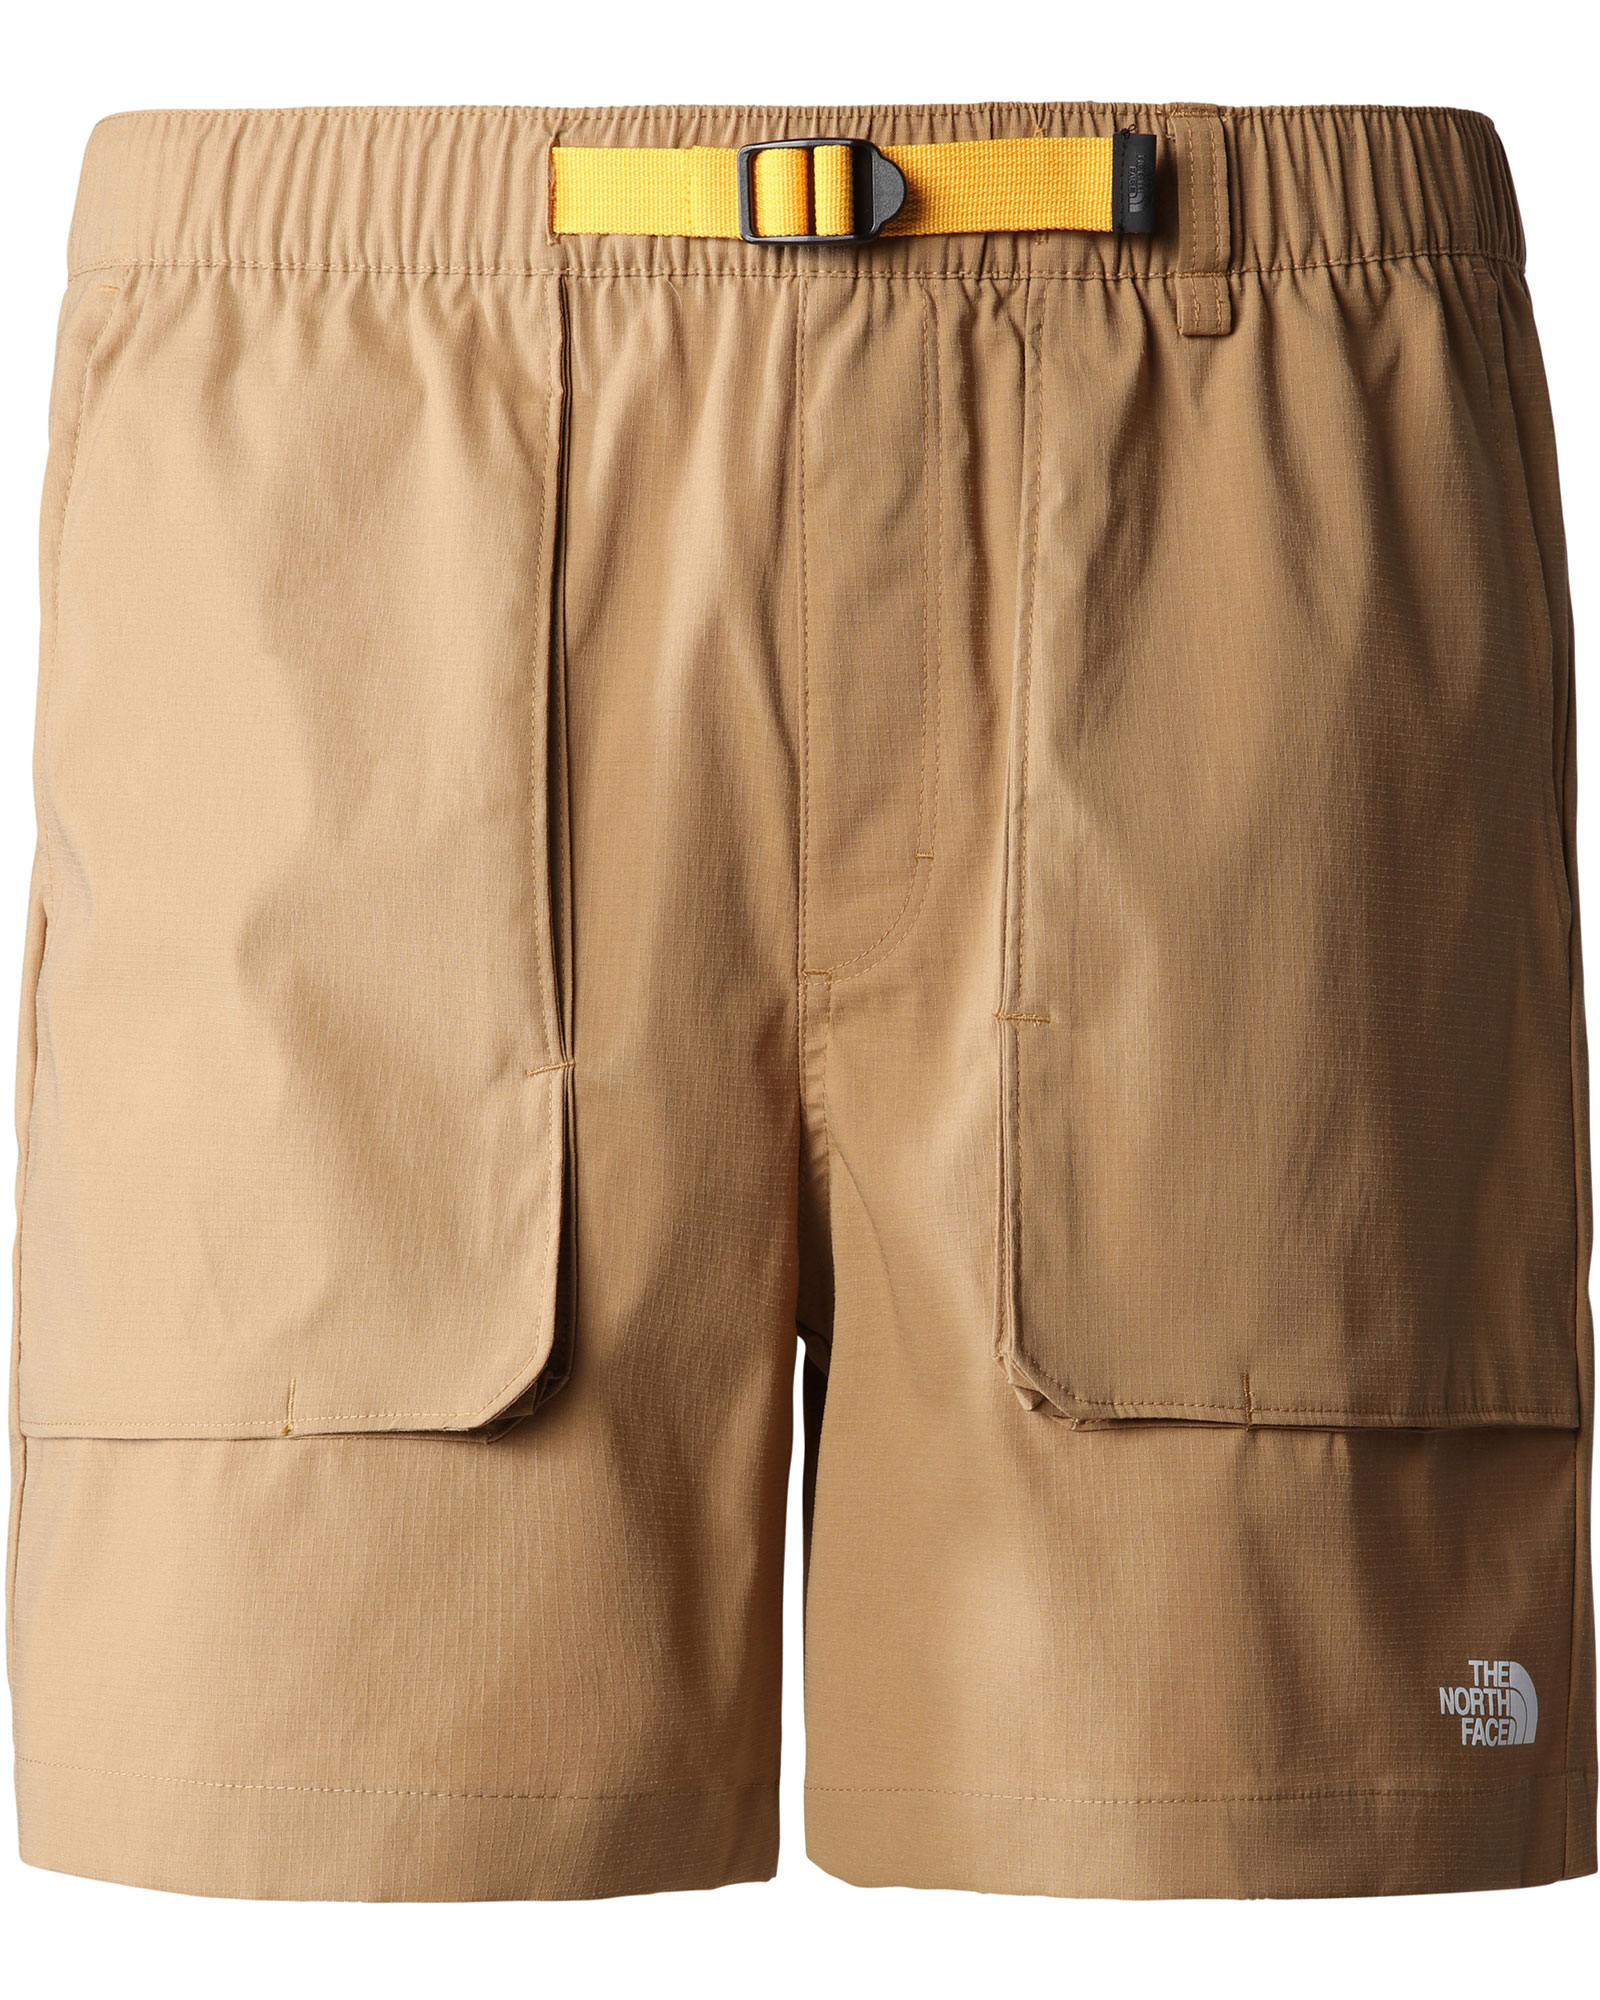 The North Face Men’s Class V Ripstop Shorts - Utility Brown S